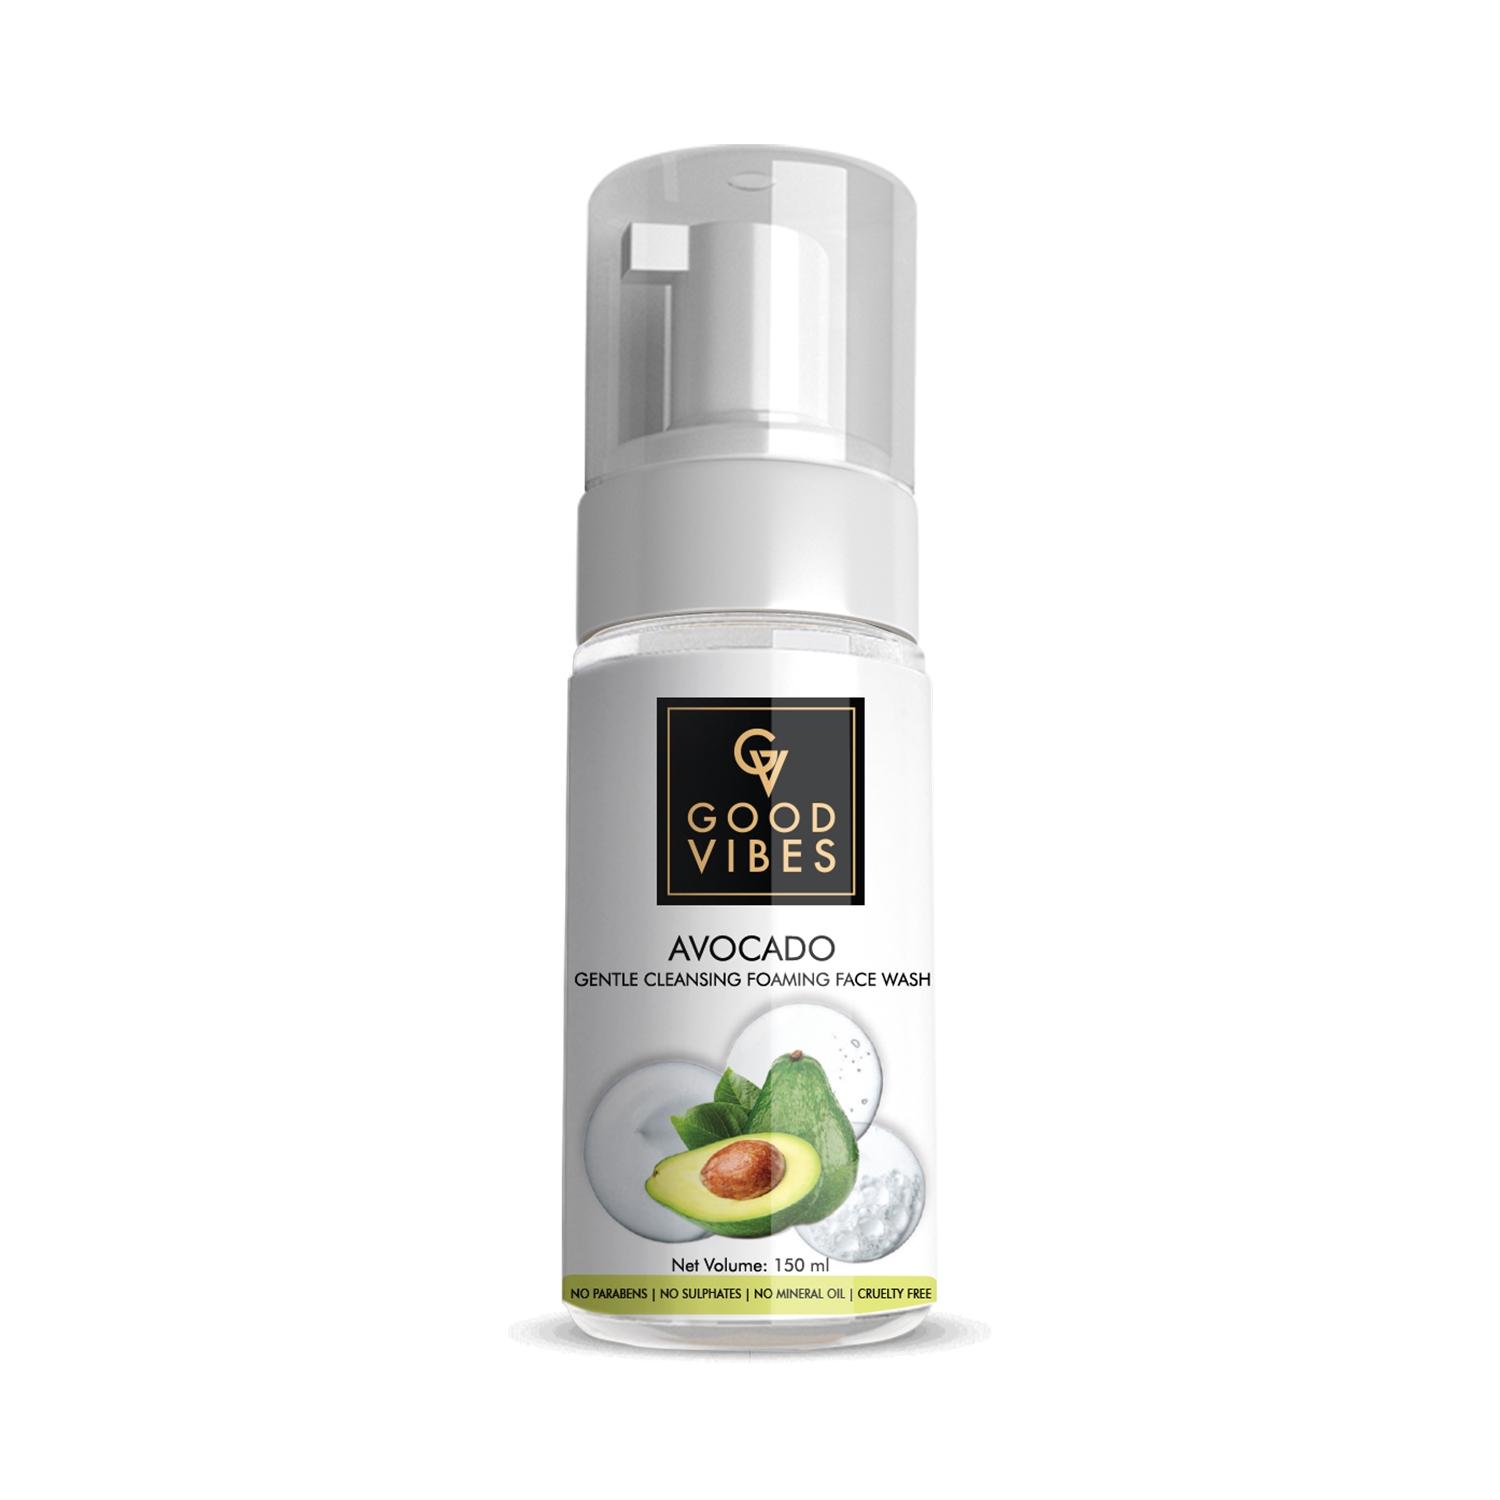 Good Vibes | Good Vibes Gentle Cleansing Foaming Face Wash - Avocado (150 ml)